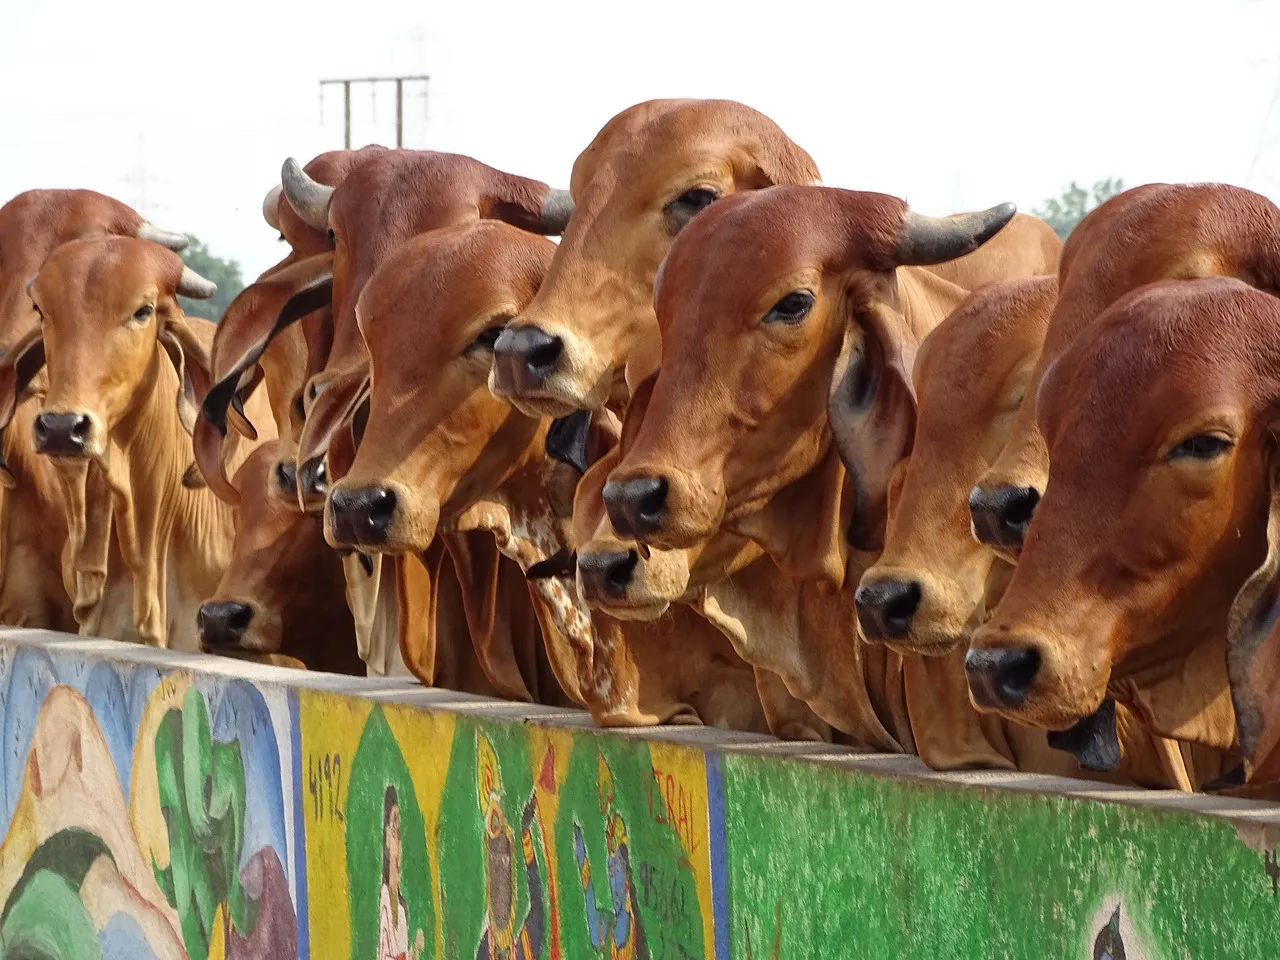 Cows in Himachal